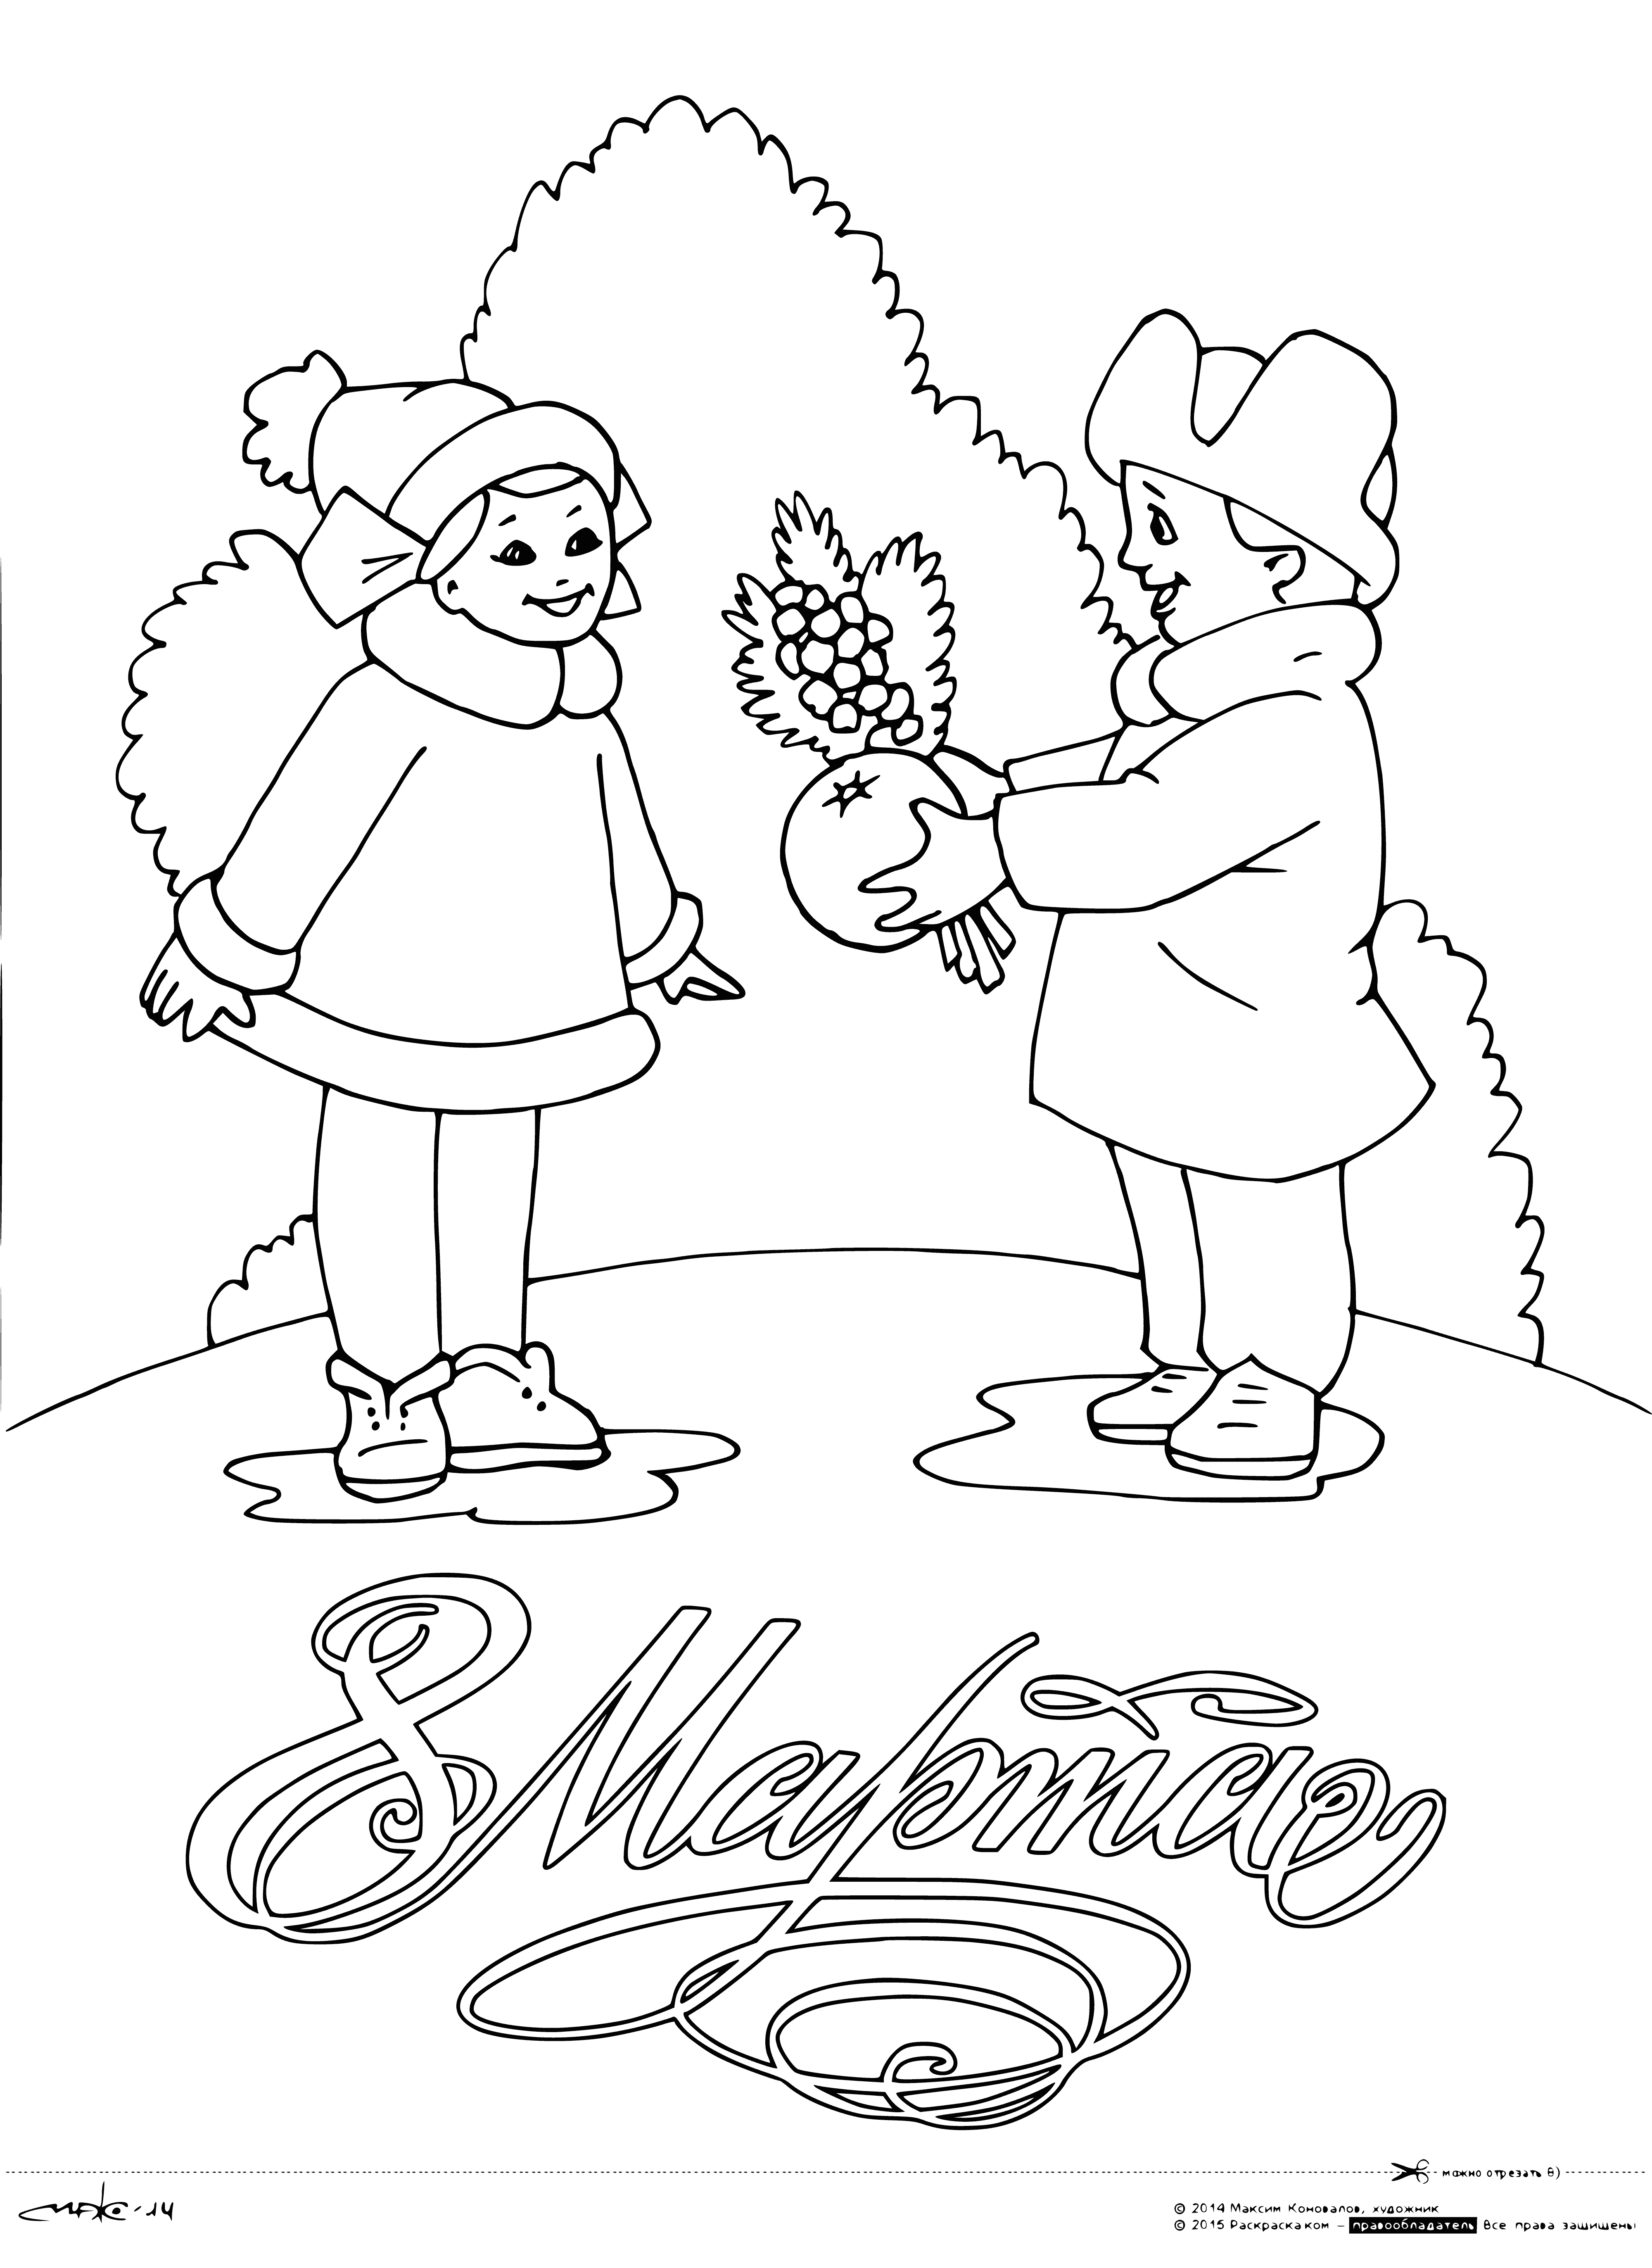 coloring page: Celebrate International Women's Day w/ a coloring page feat. women of different ages & races smiling & celebrating in the background! #IWD2020